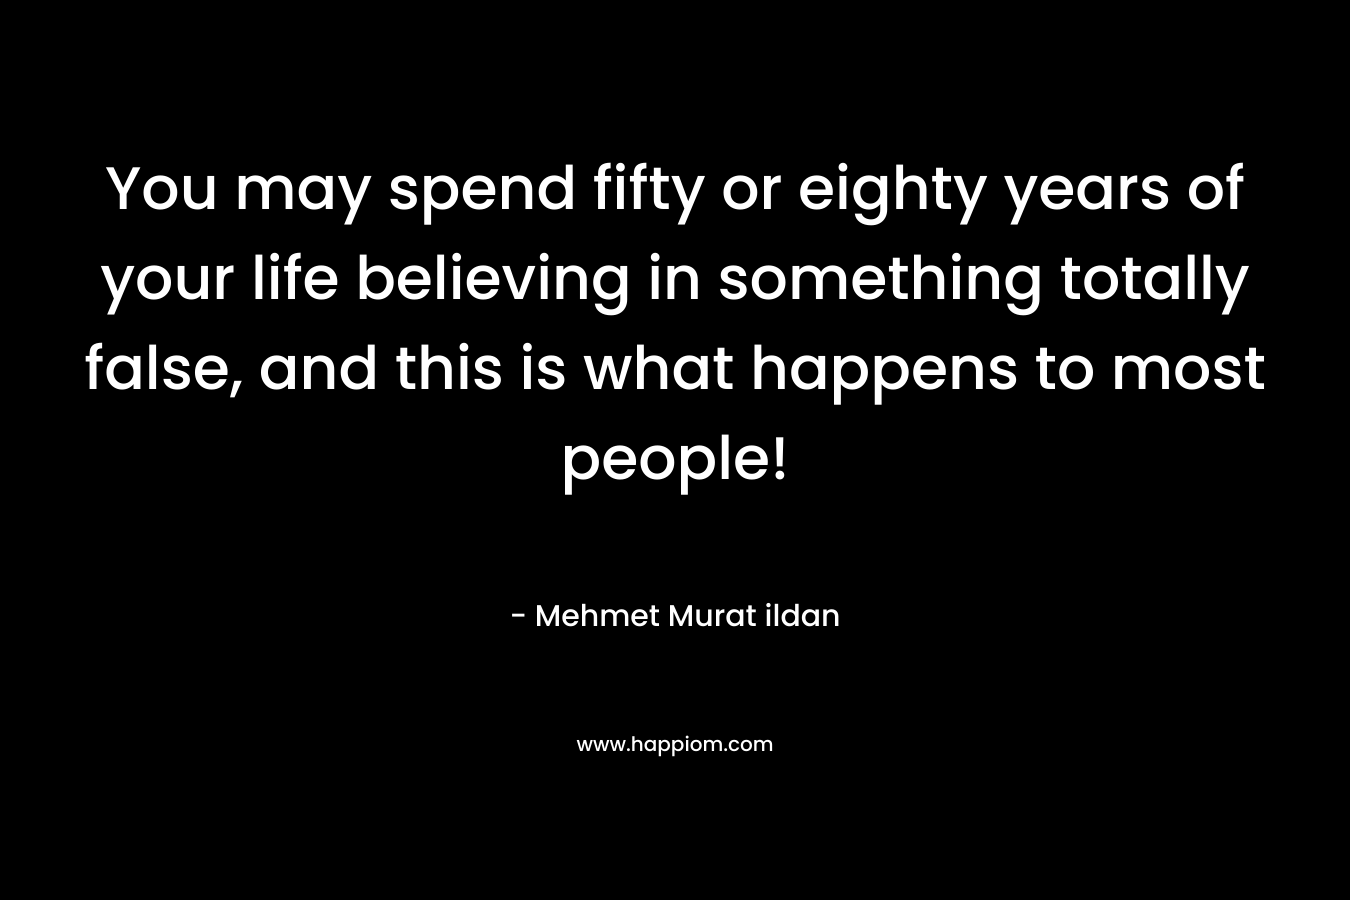 You may spend fifty or eighty years of your life believing in something totally false, and this is what happens to most people!